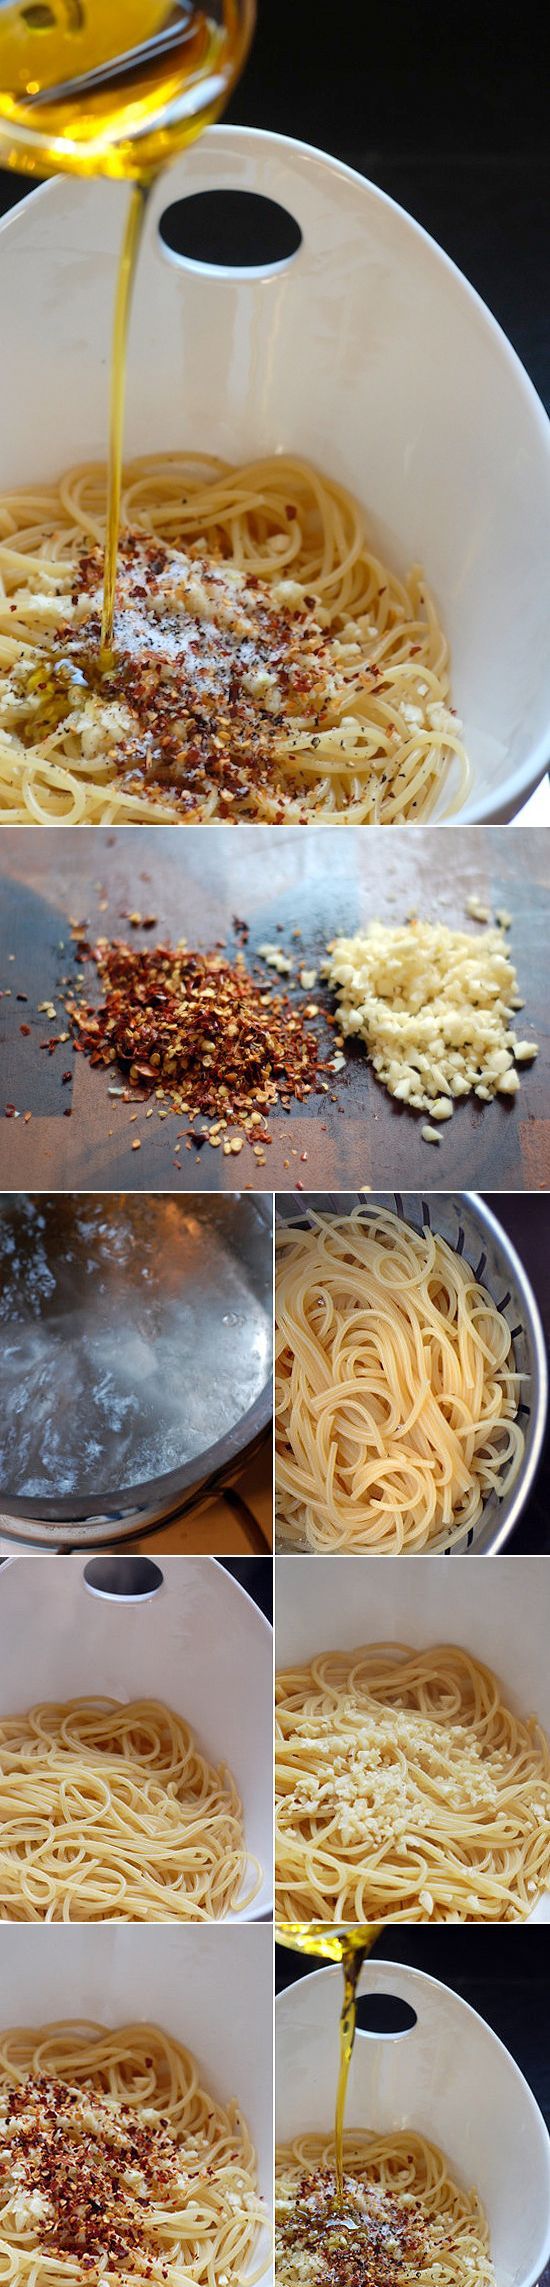 Spaghetti aglio, olio, e peperoncino is a traditional Italian pasta dish. It’s well loved by many because it’s so easy and